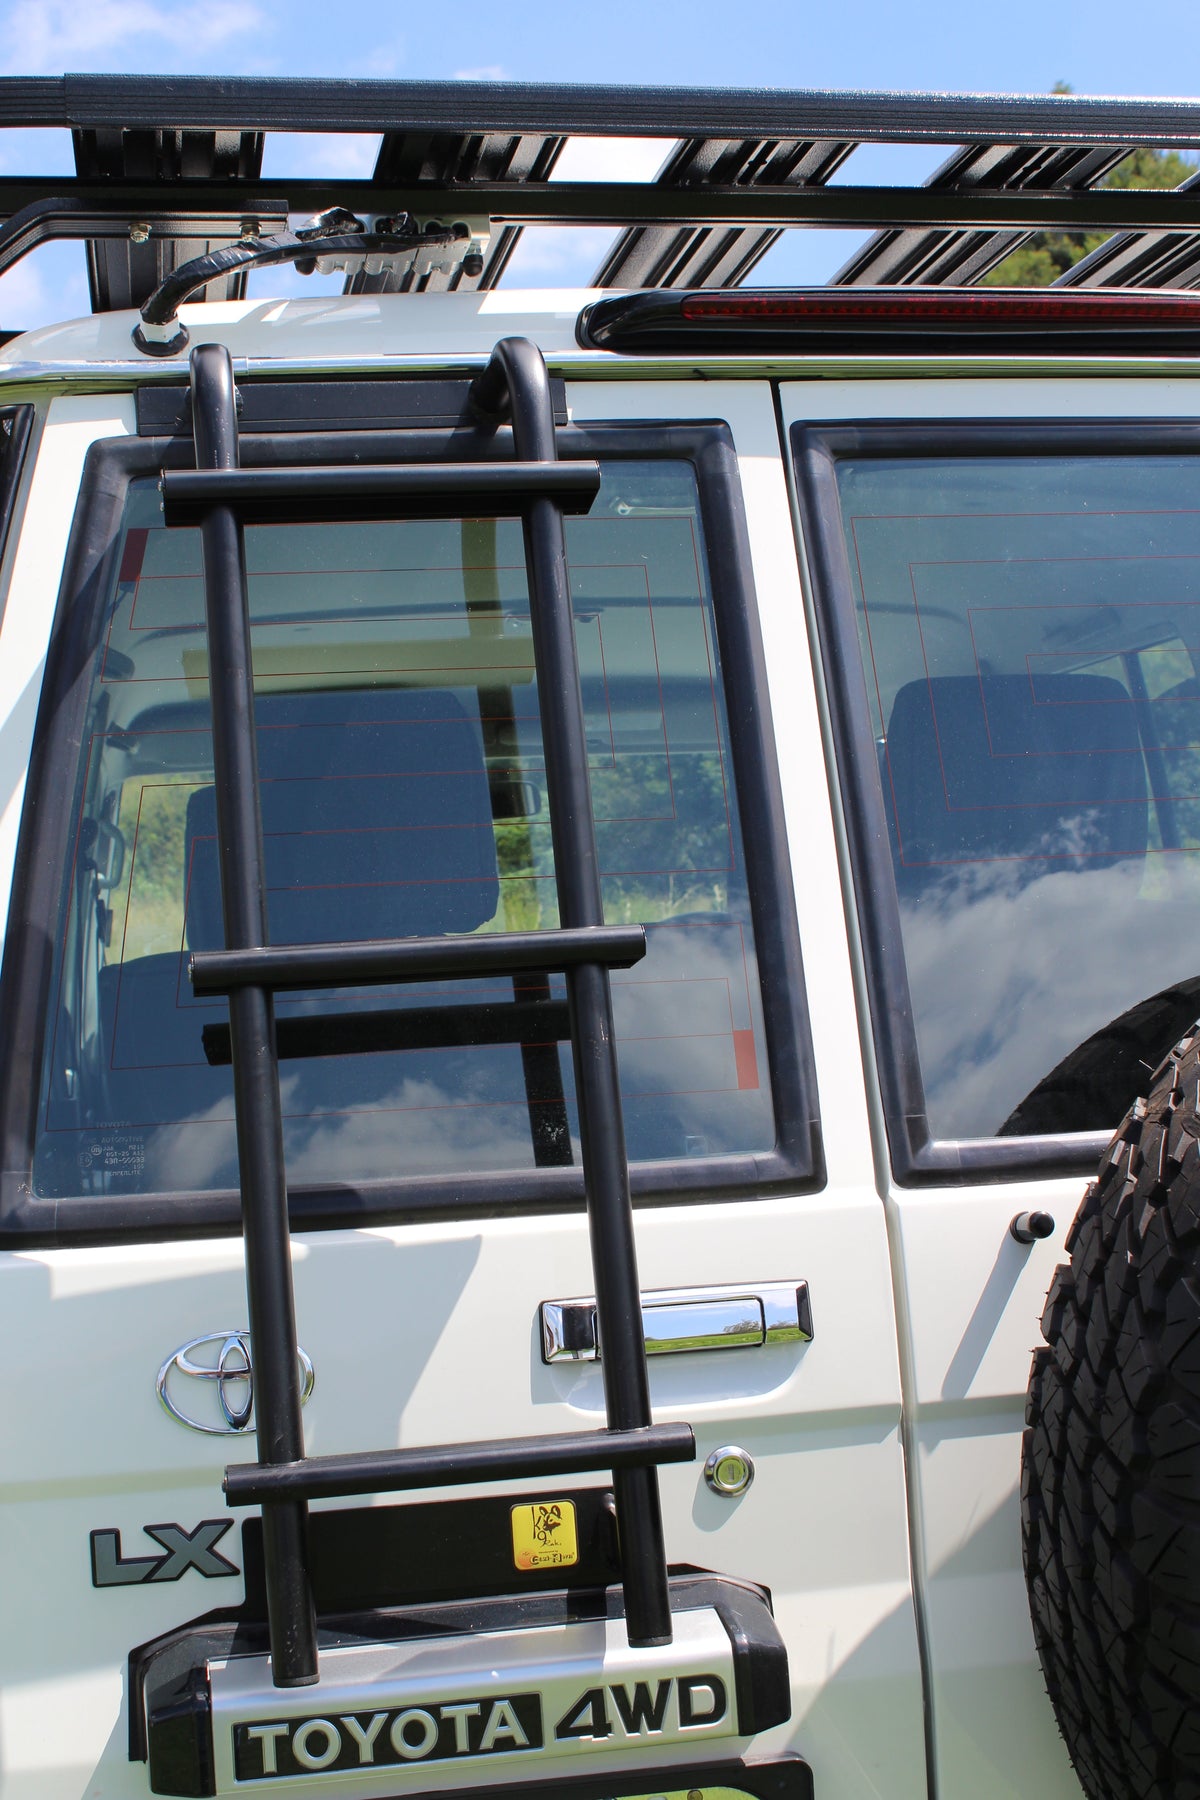 Eezi-Awn K9 Ladder 76 Series Roof Rack Accessories Eezi-Awn- Overland Kitted